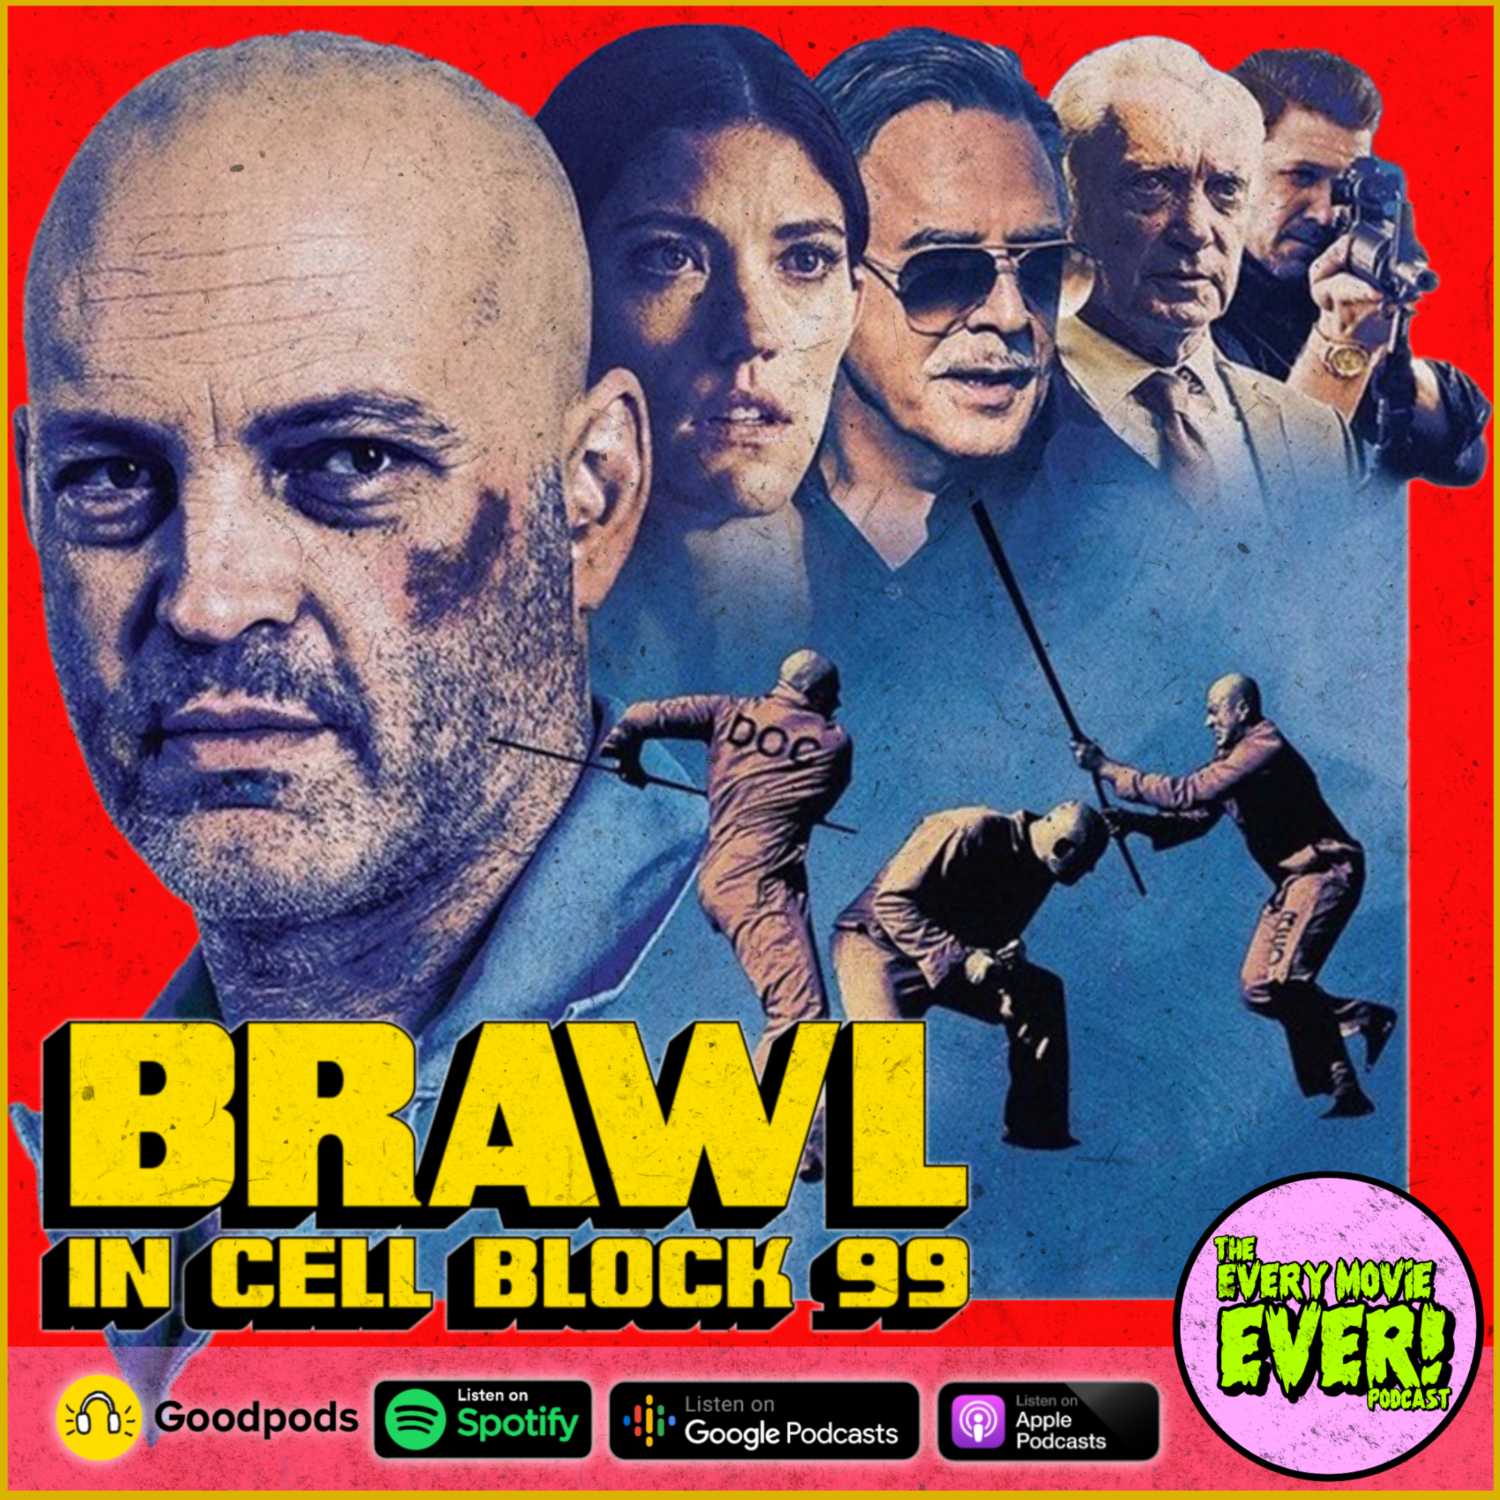 Brawl In Cell Block 99 (2017): The Very Best Film You Never Saw